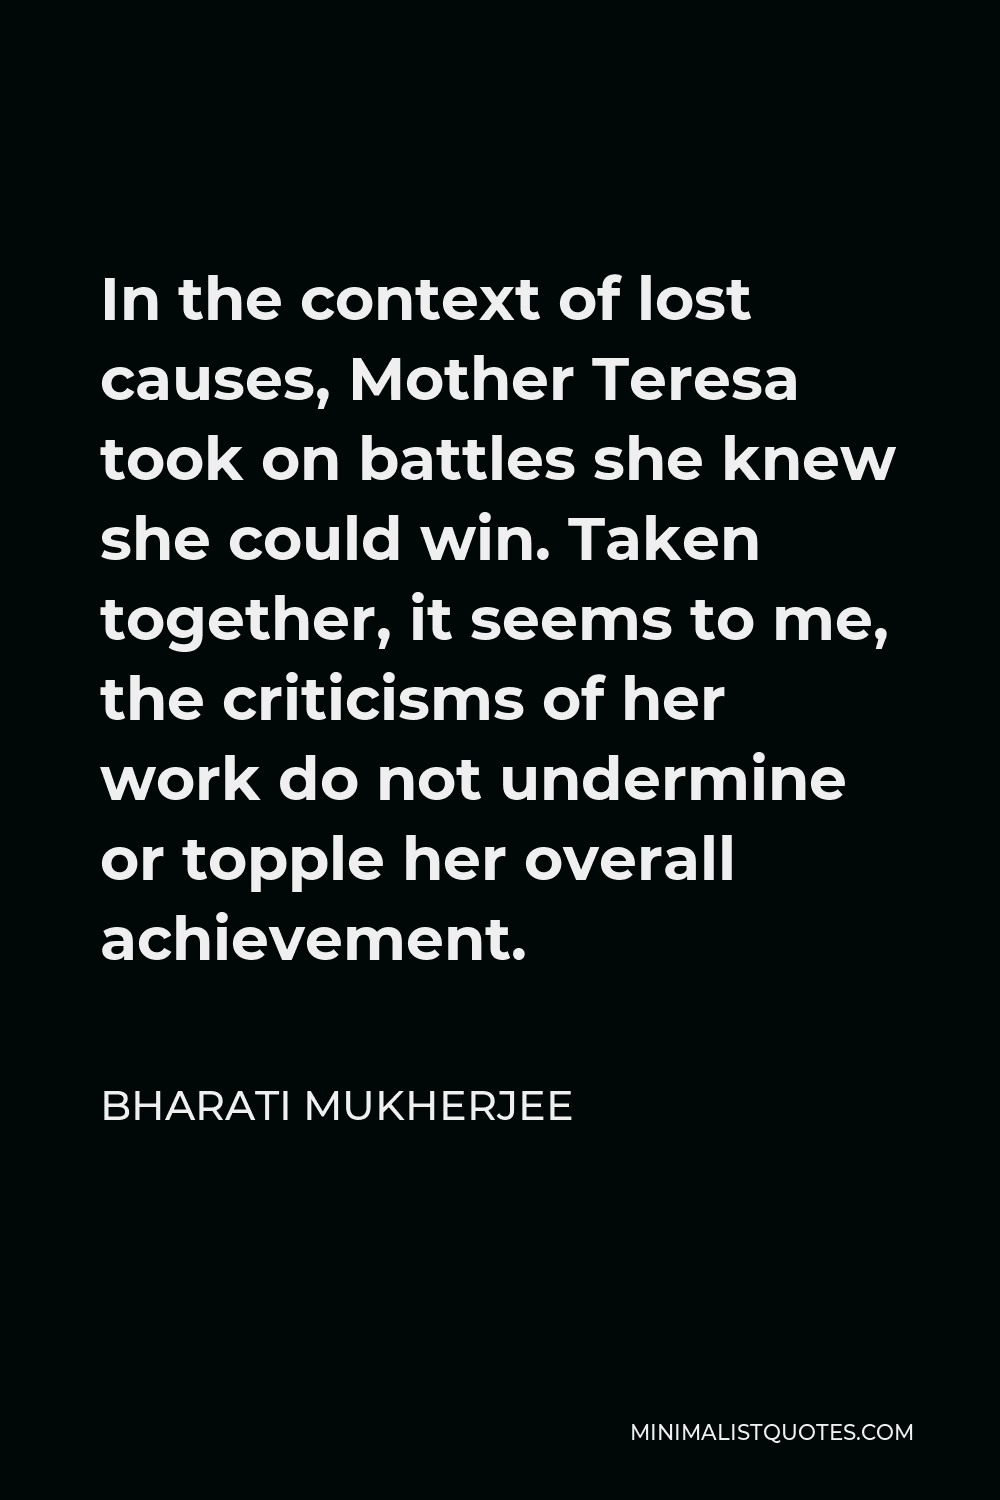 Bharati Mukherjee Quote - In the context of lost causes, Mother Teresa took on battles she knew she could win. Taken together, it seems to me, the criticisms of her work do not undermine or topple her overall achievement.